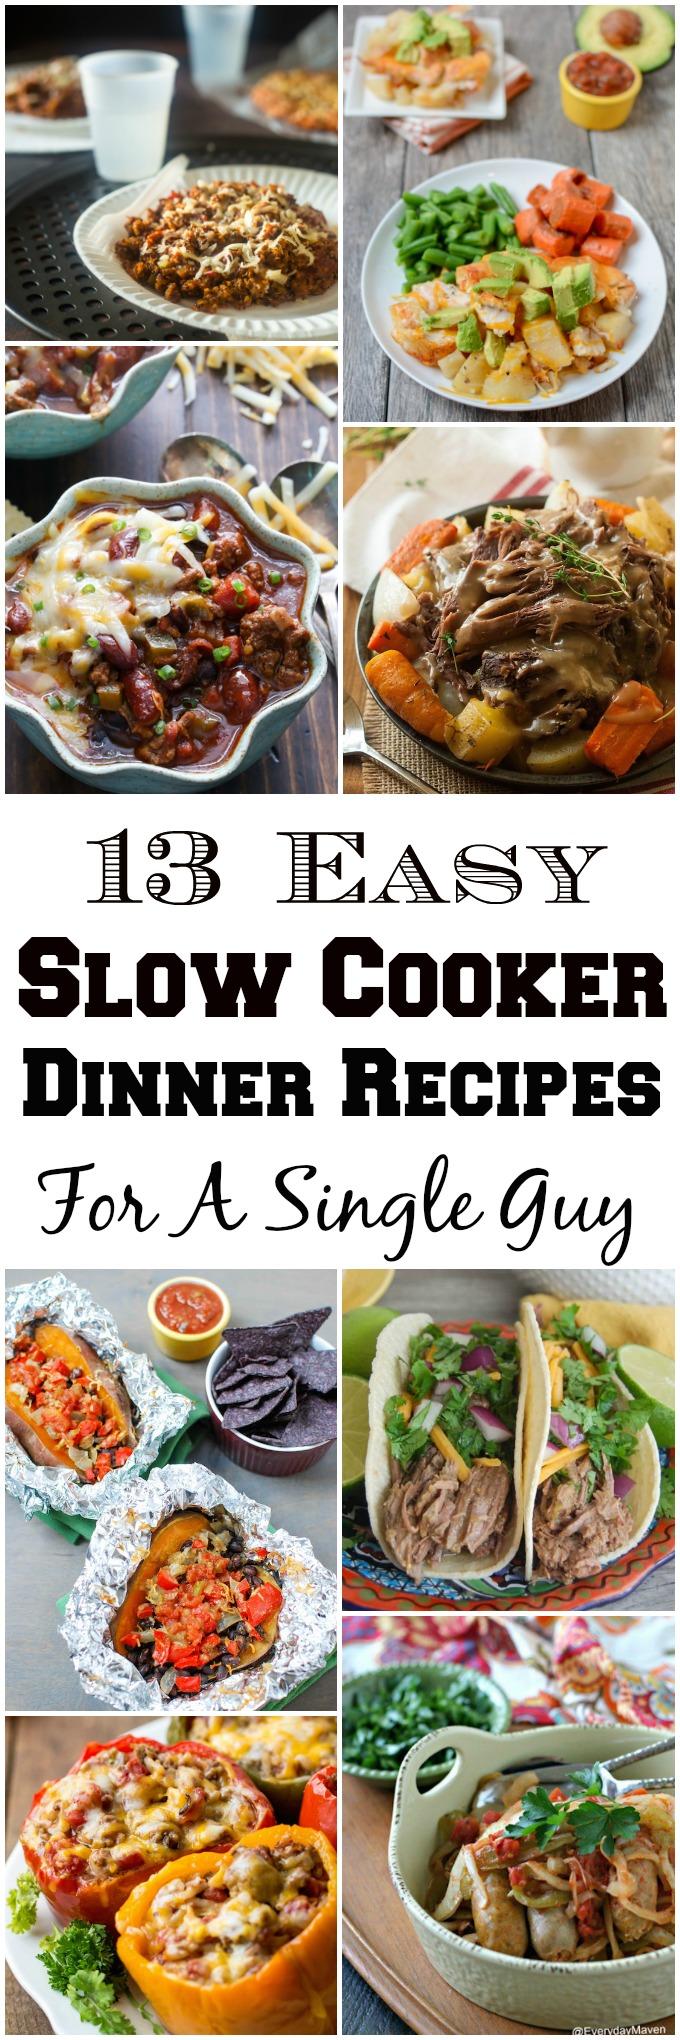 https://www.theleangreenbean.com/wp-content/uploads/2016/04/easy-slow-cooker-dinners-1.jpg